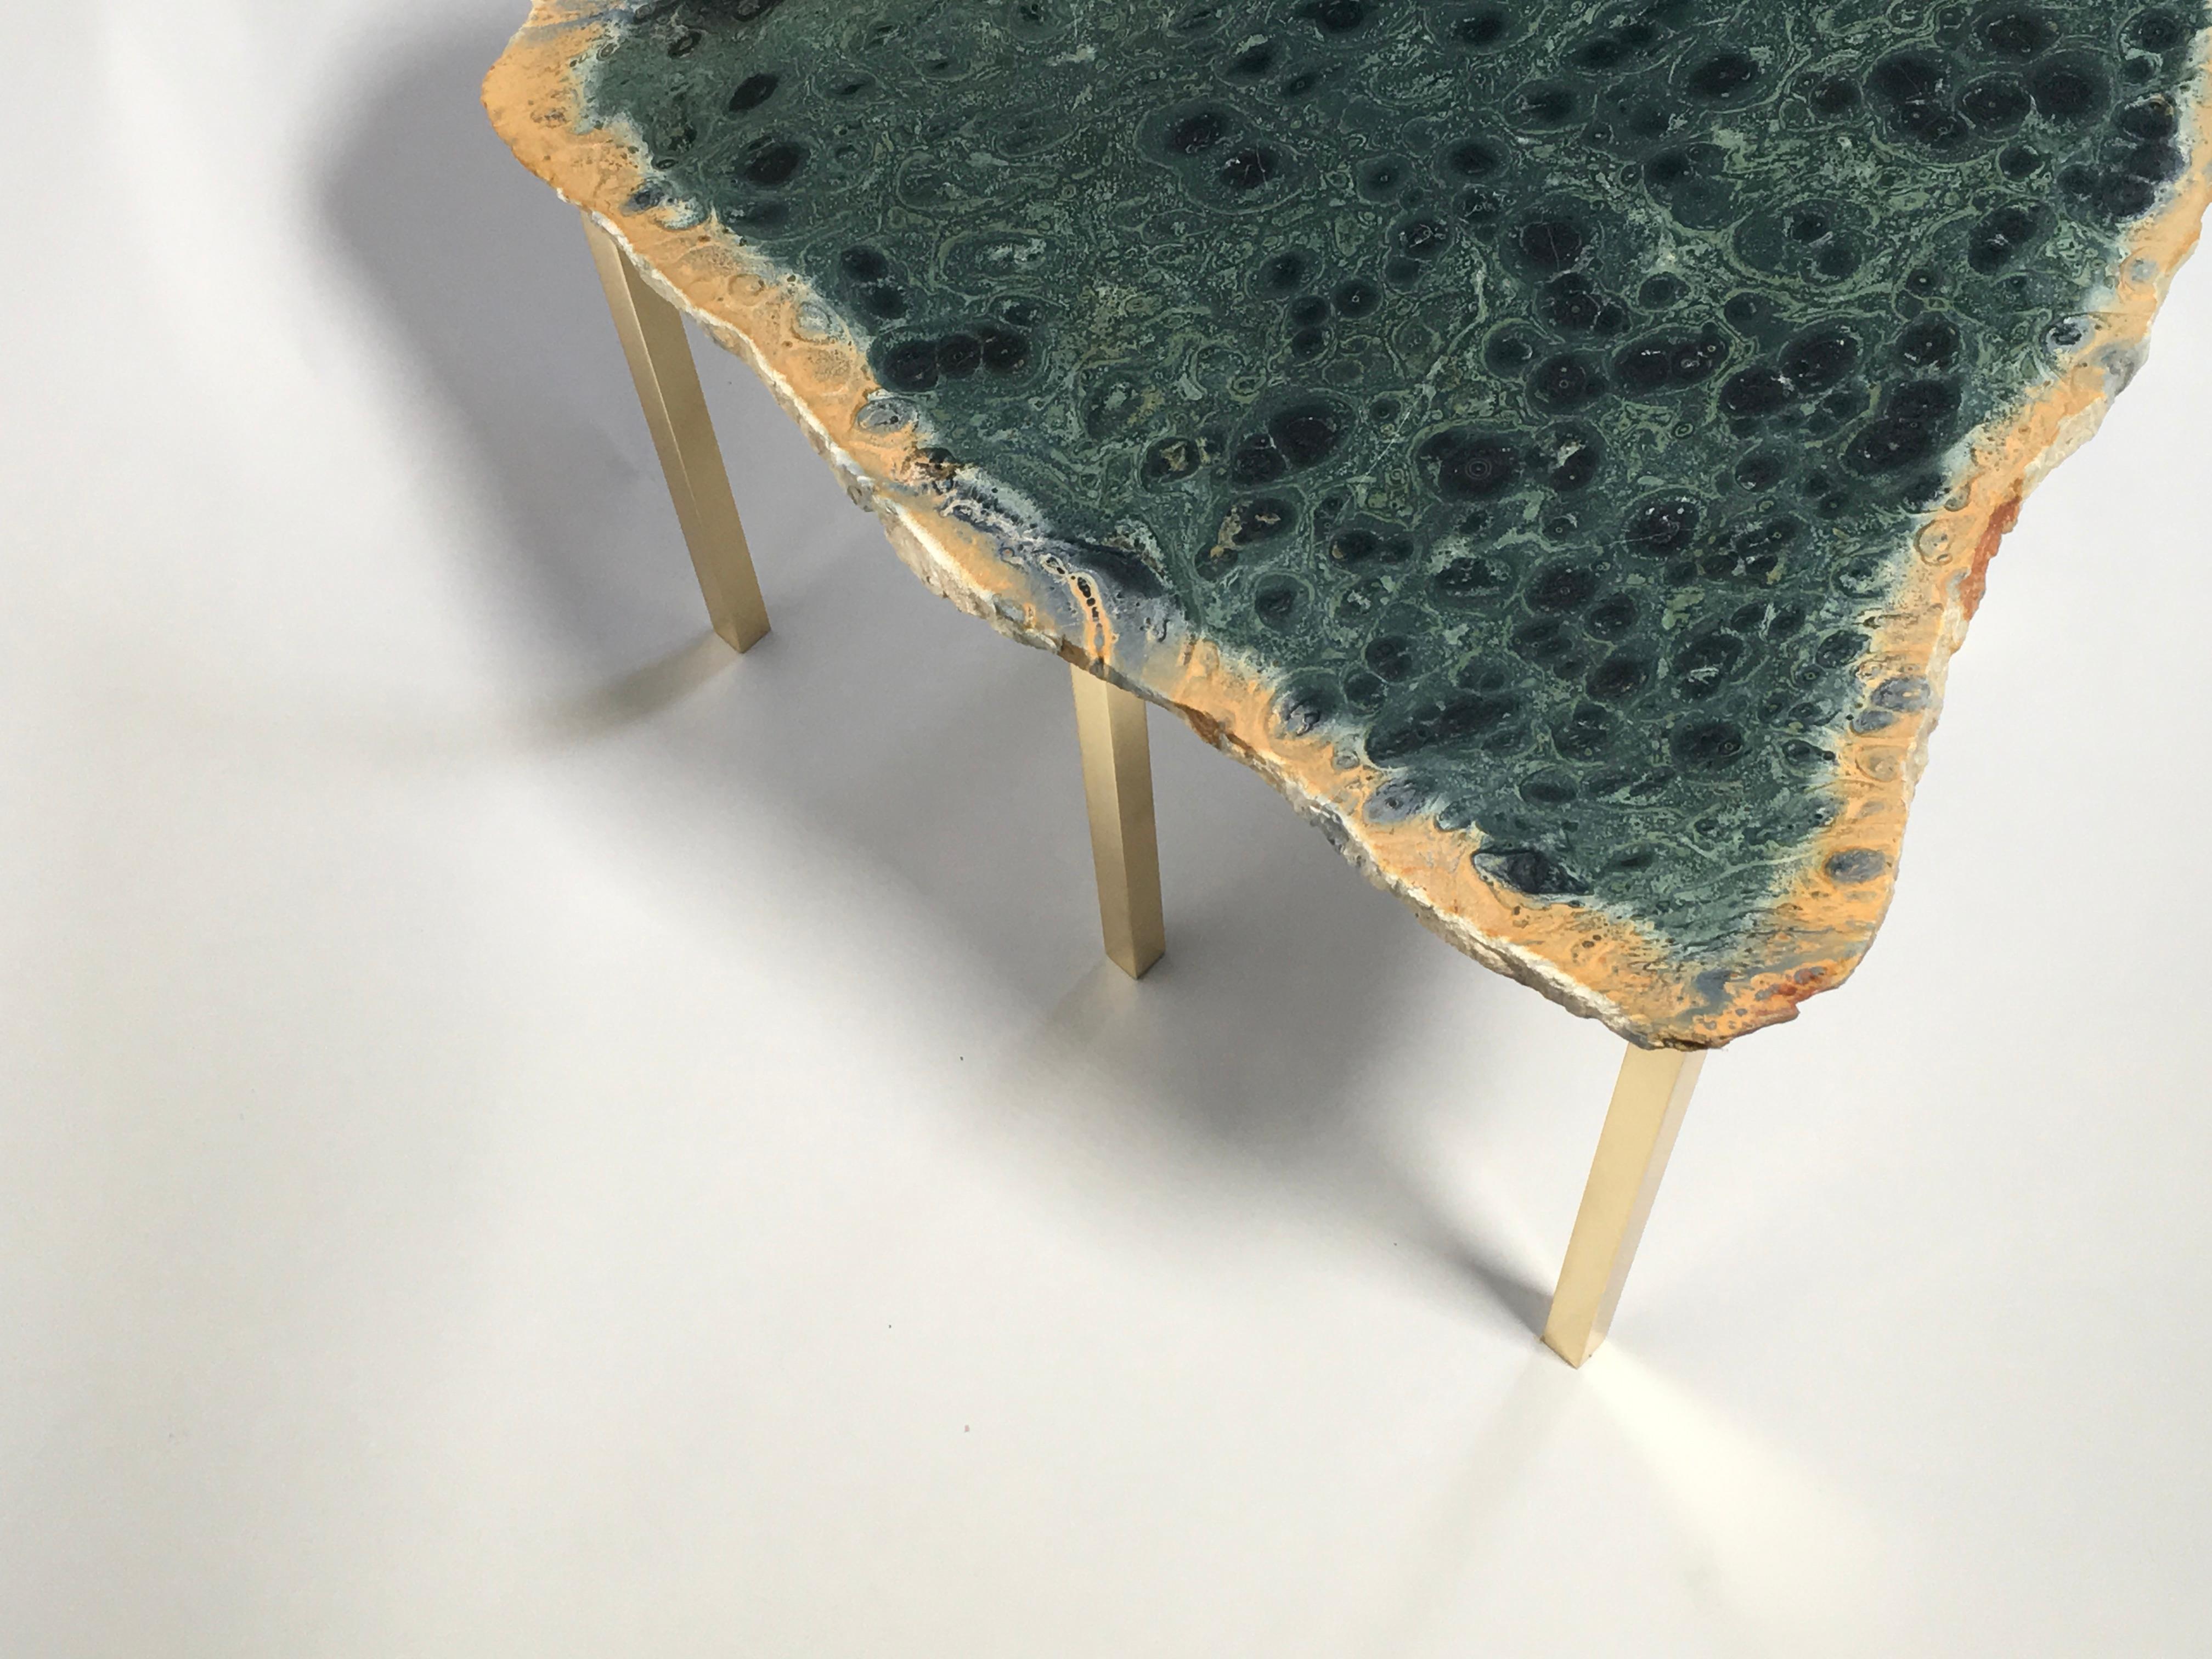 Coffee table with top in Kabamba jasper from Madagascar and with five brass legs designed by Studio Superego for Superego Editions, in 2018. Unique piece.

Biography
Superego Editions were born in 2006, performing a constant activity of research in